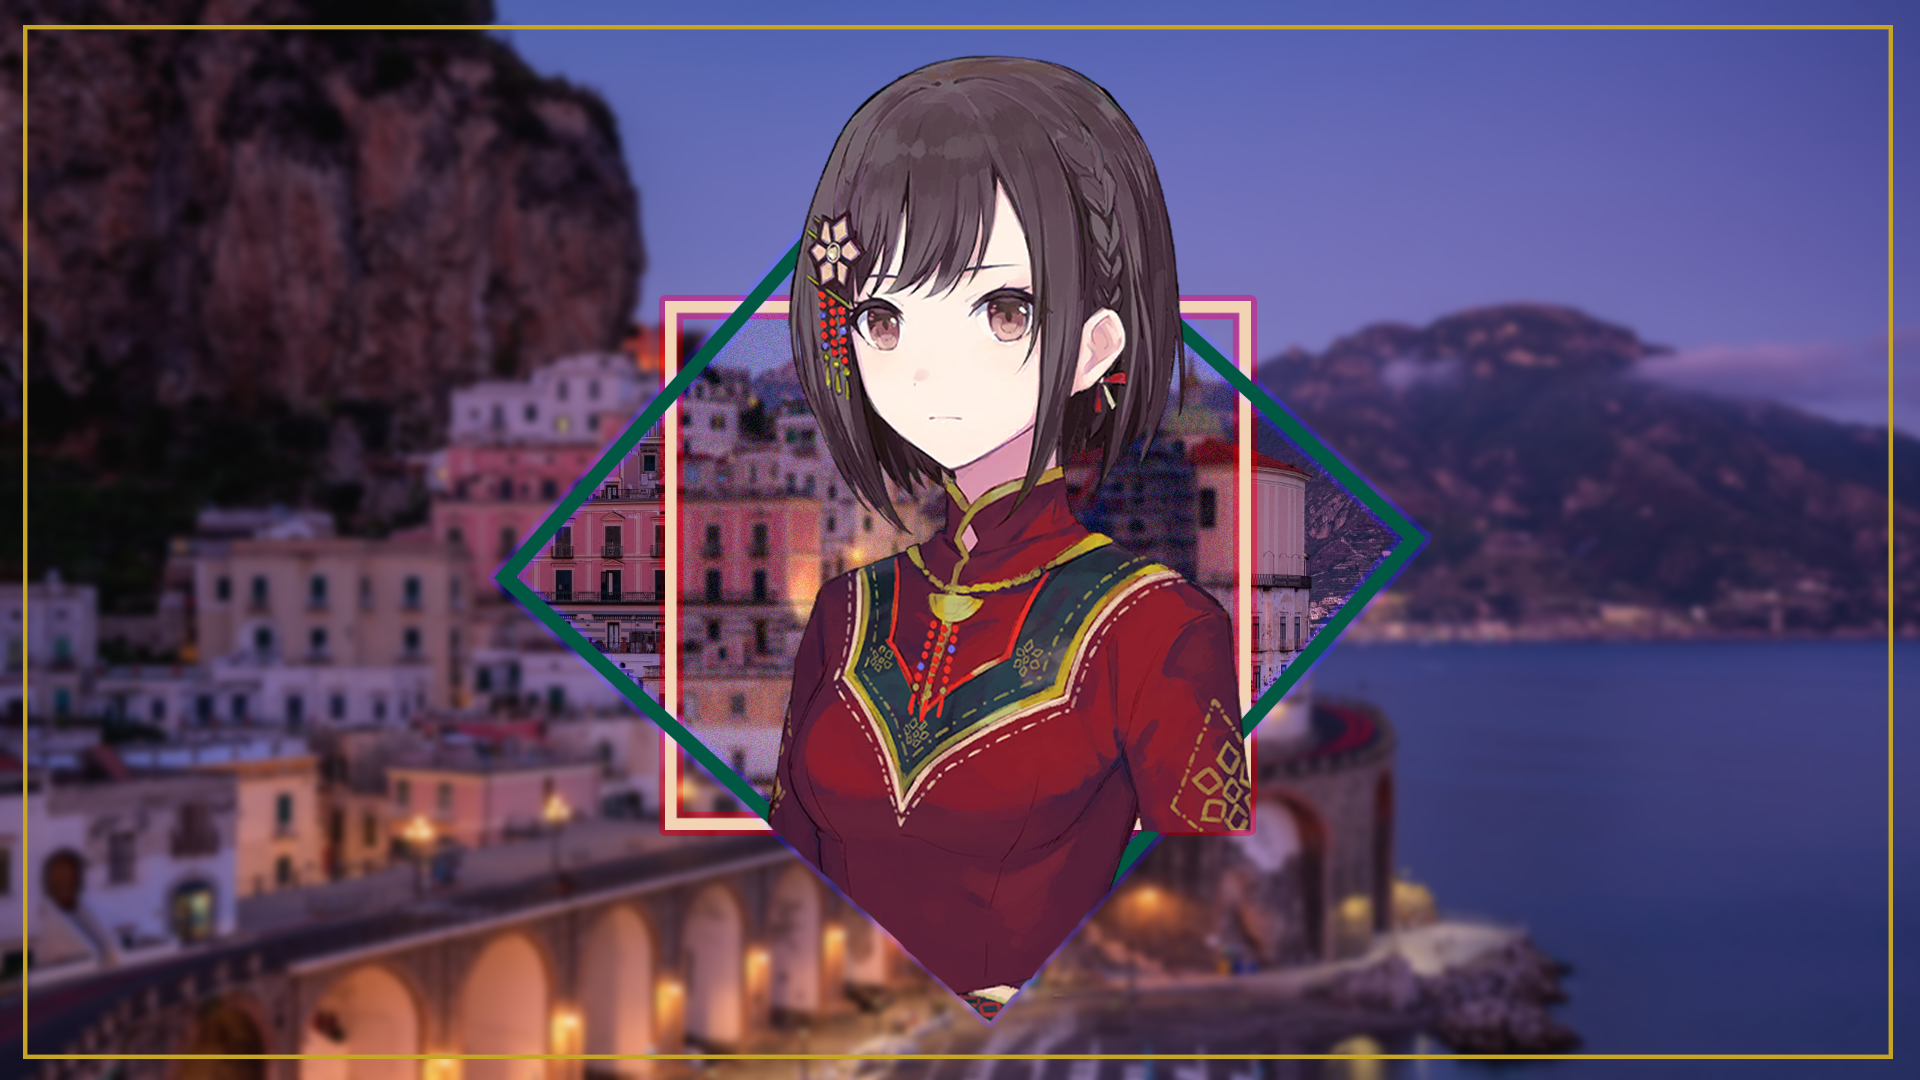 Anime Girls Picture In Picture Project Sekai Colorful Stage Night Italy Campania 1920x1080